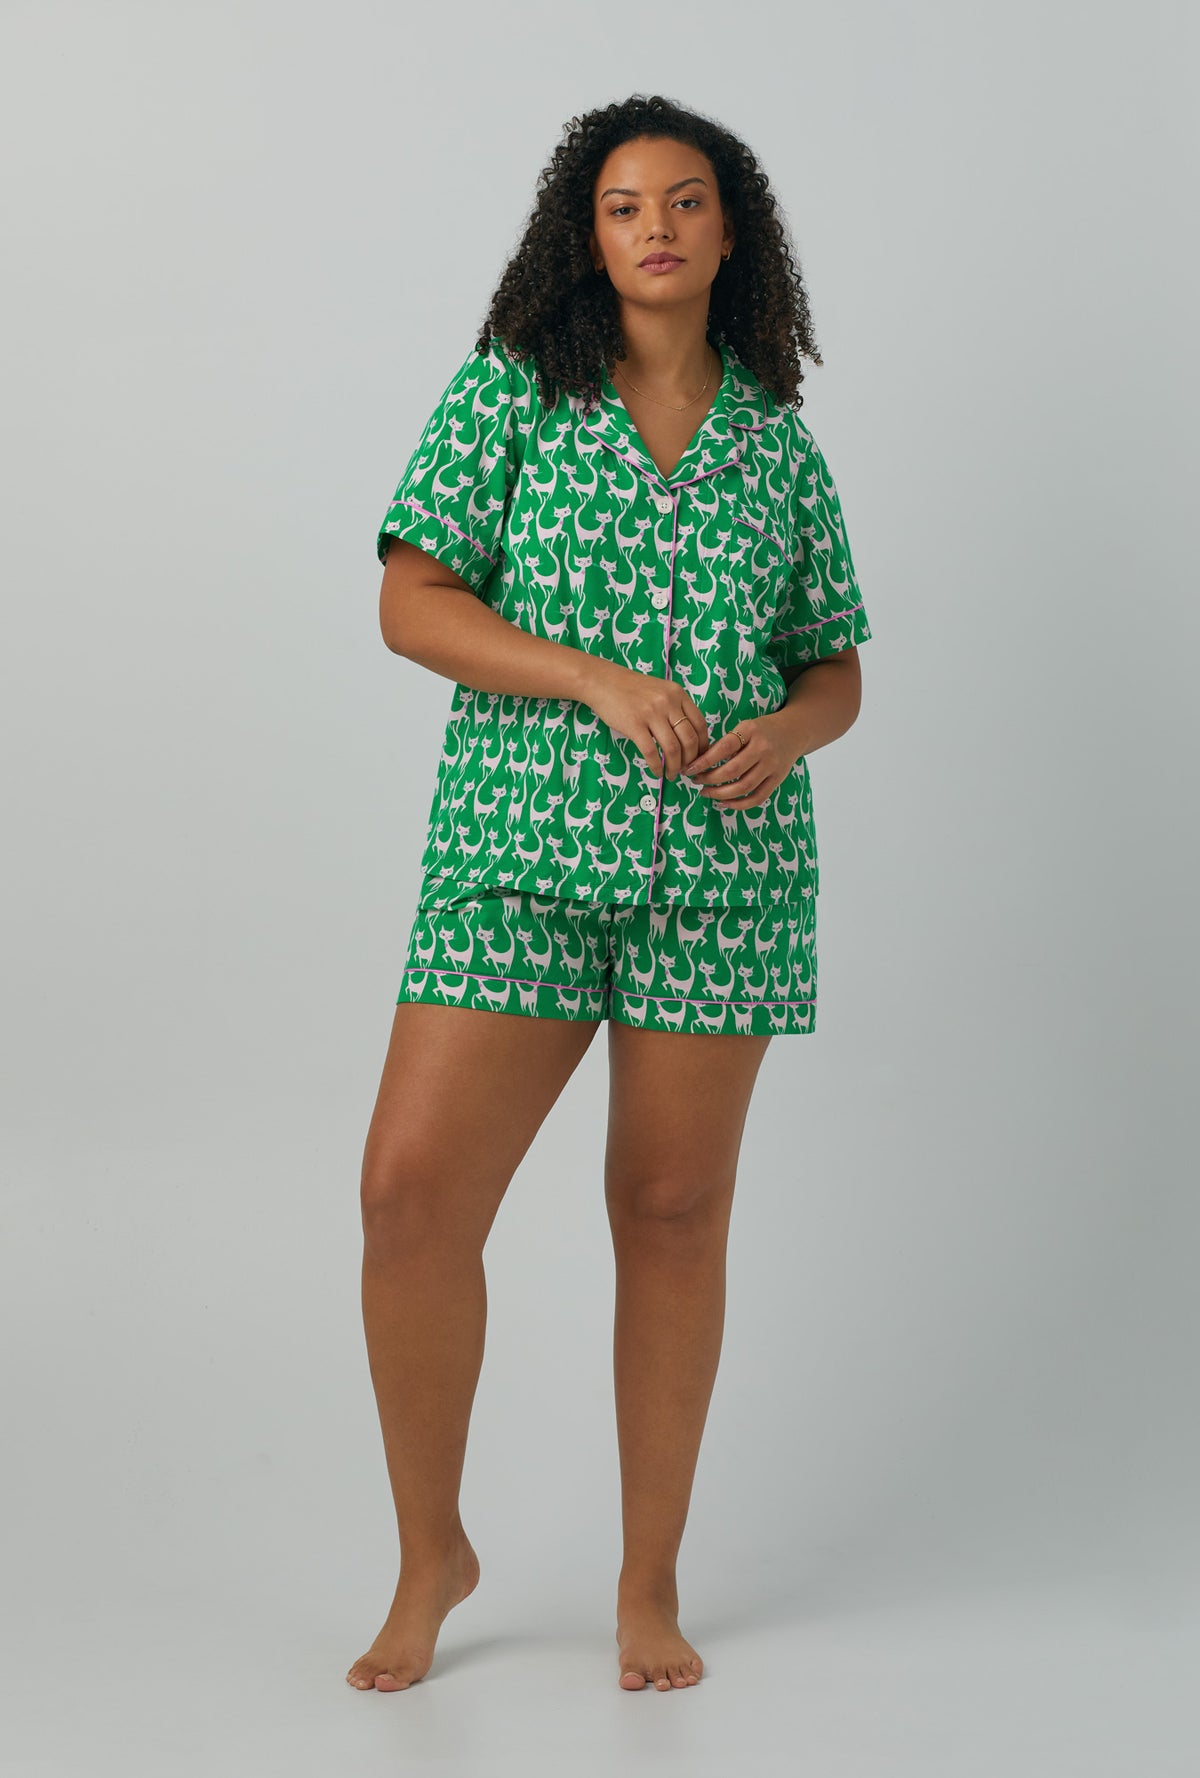 A lady wearing plus size green Short Sleeve Classic Shorty Stretch Jersey PJ Set with Cool Cats print